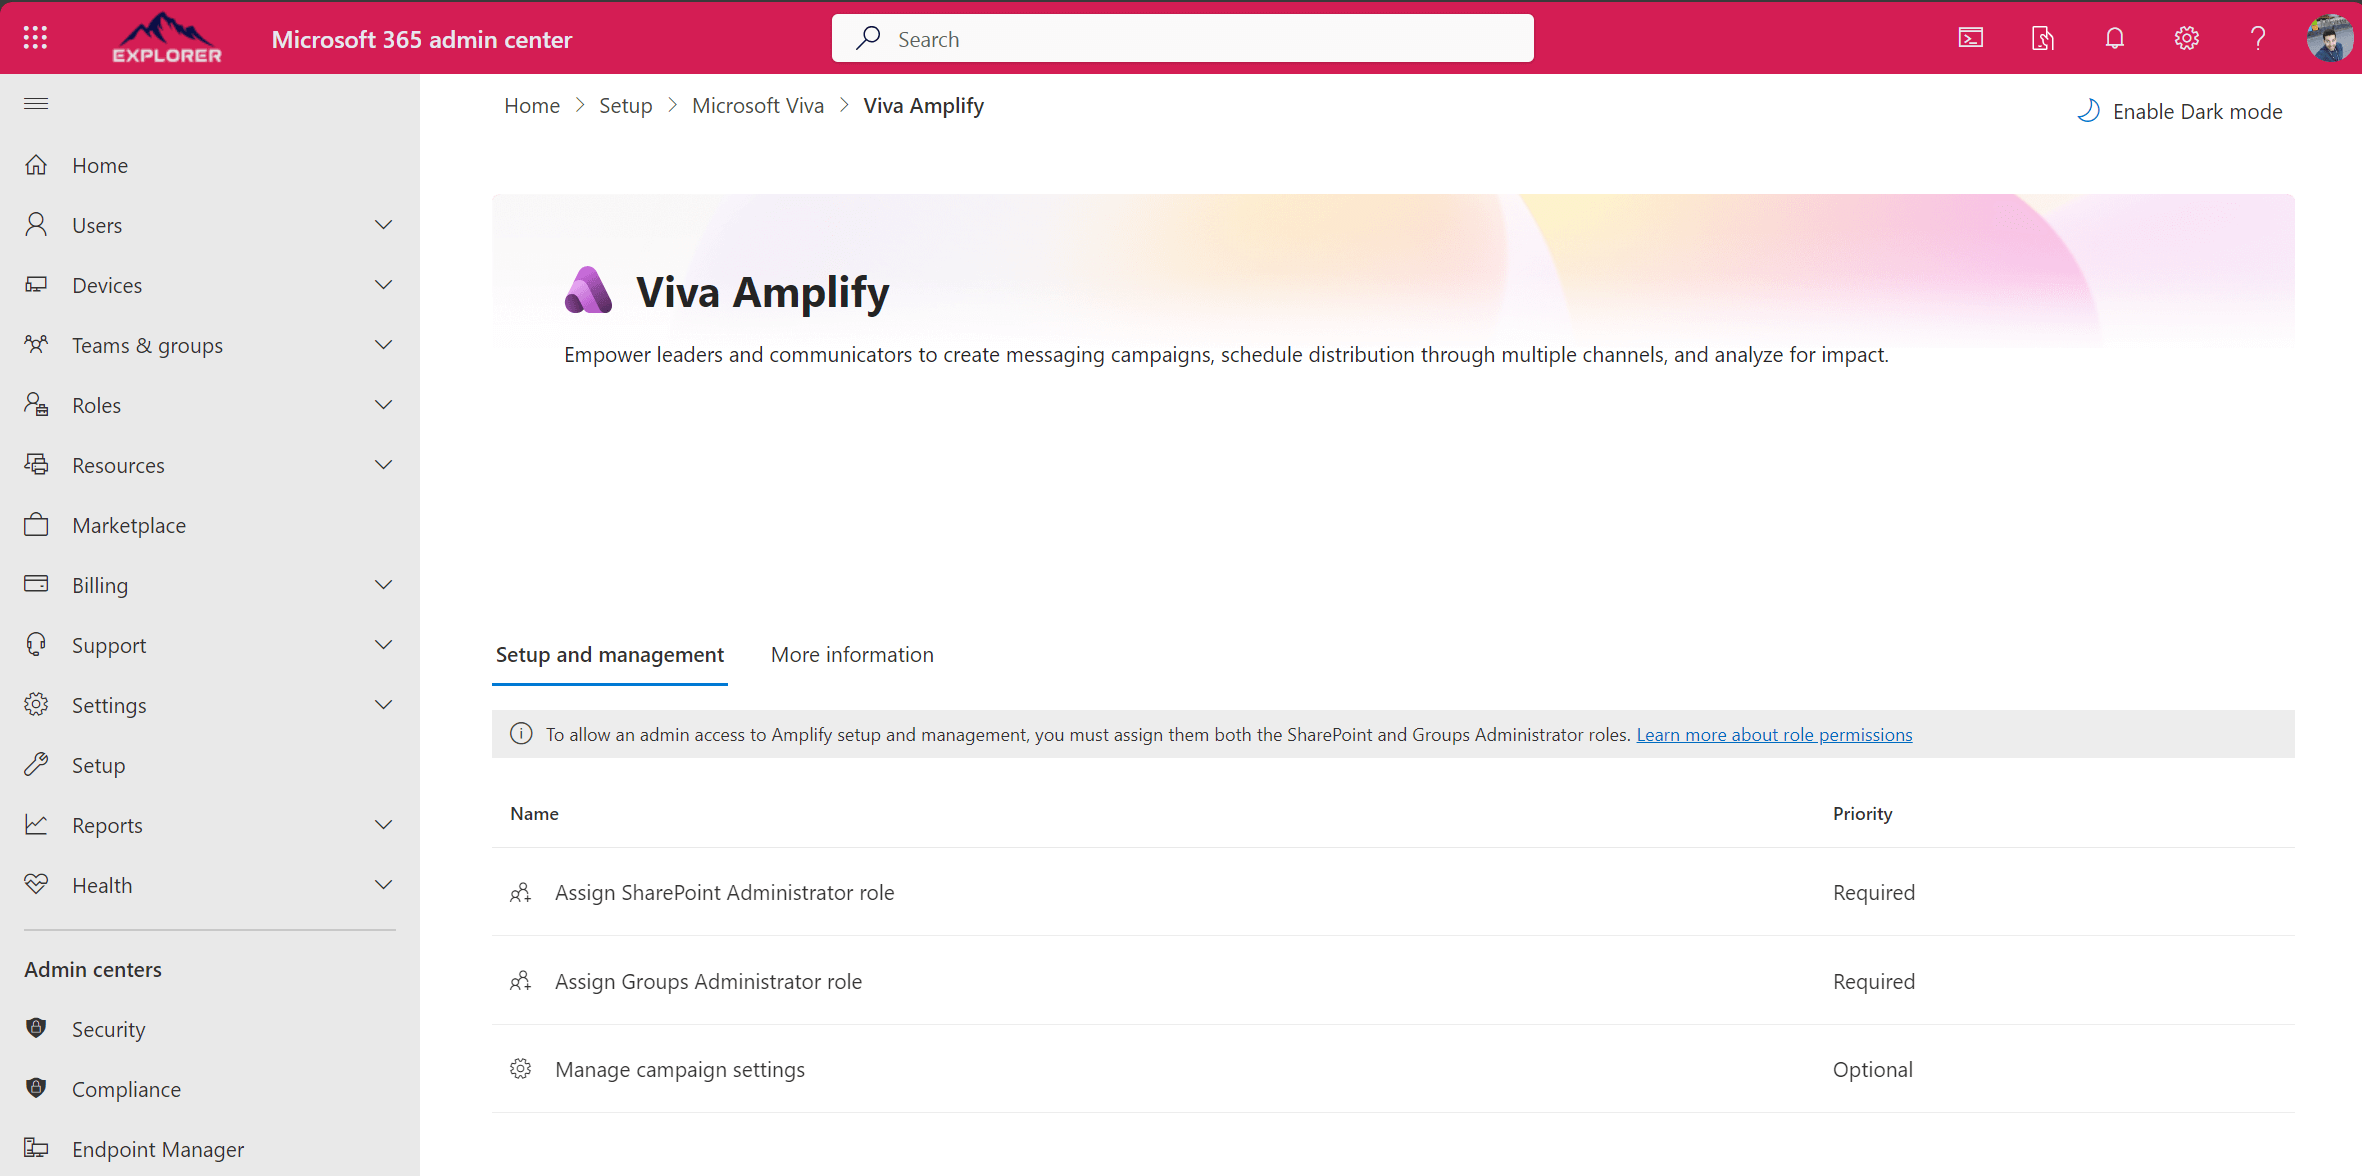 Access Viva Amplify since day one